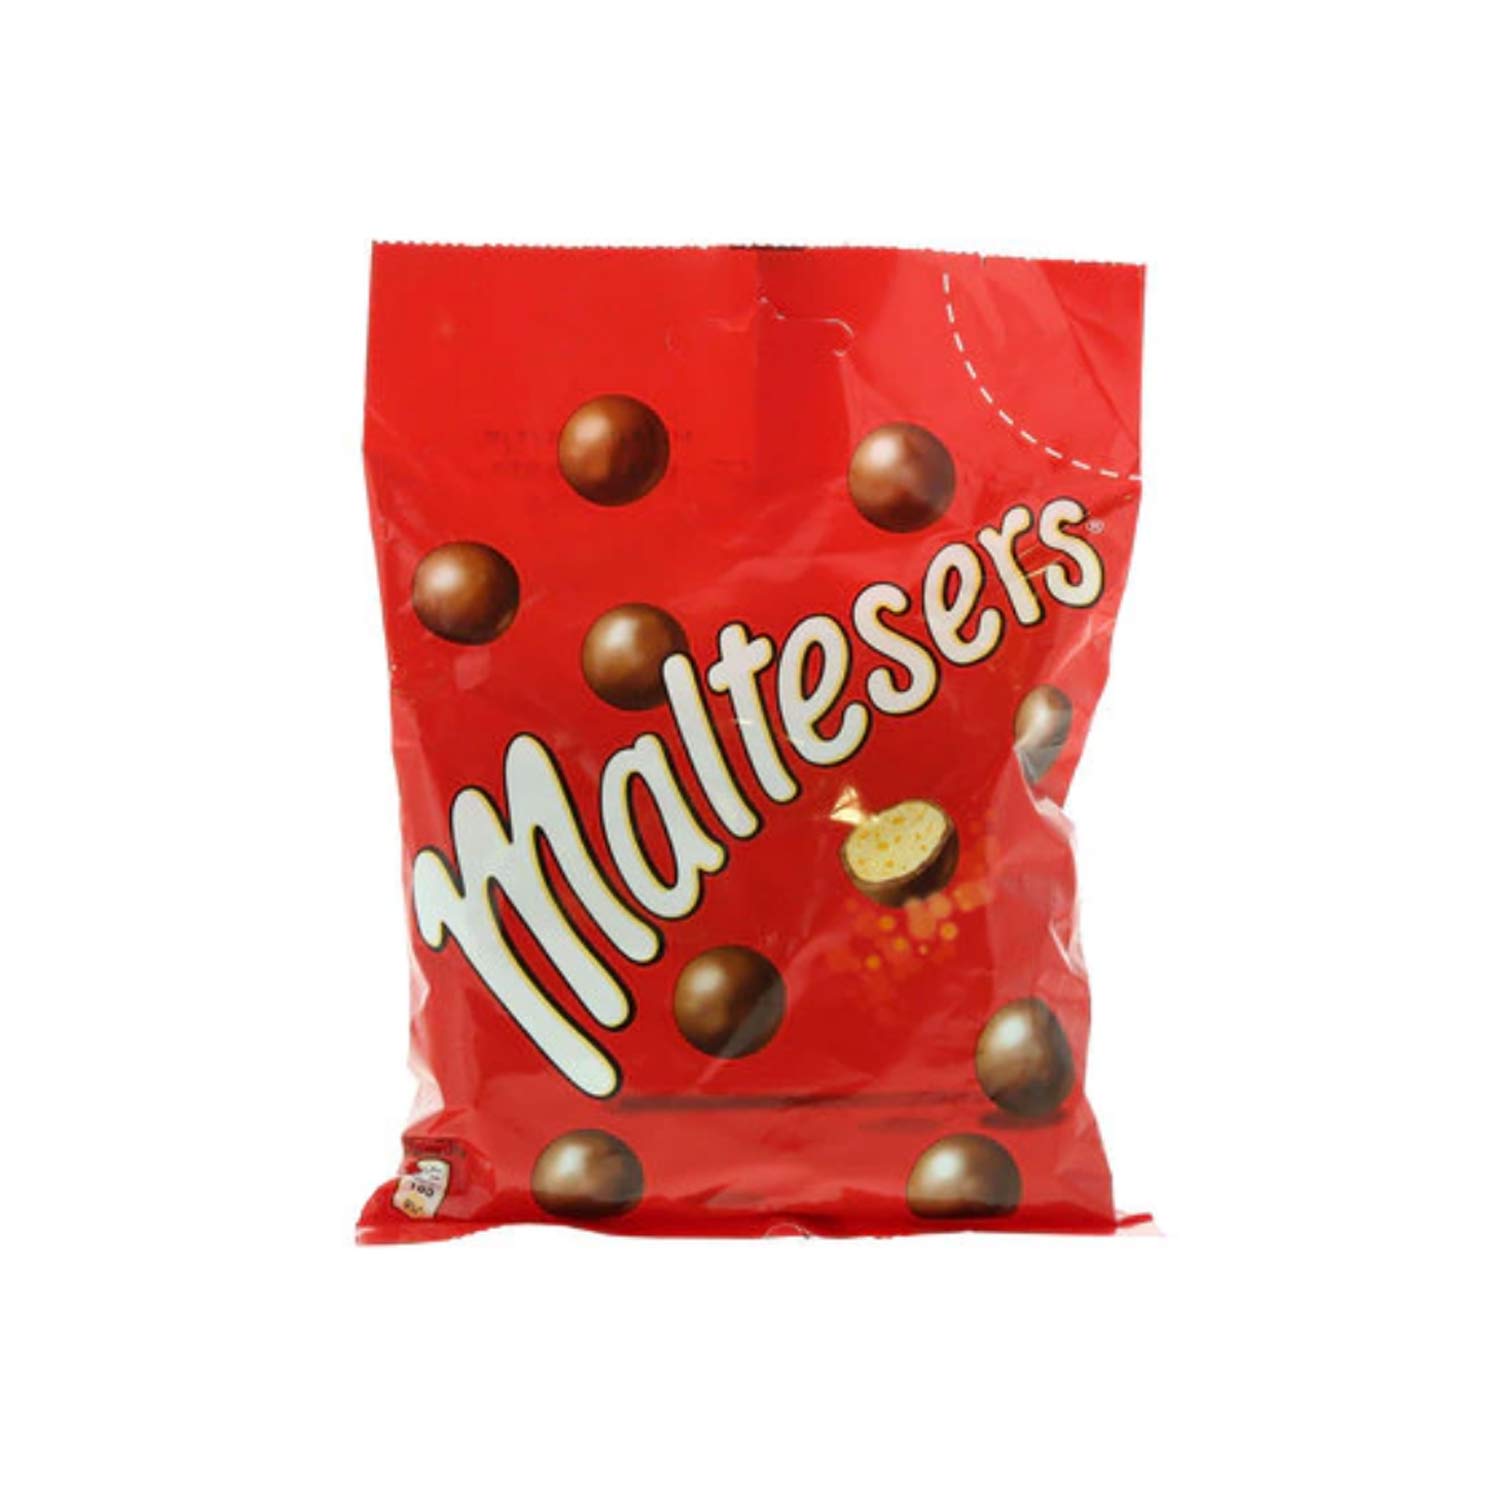 Shop 1/2 Kilo of Maltesers (6 Bags of 85g) Maltesers and save money for all  the family